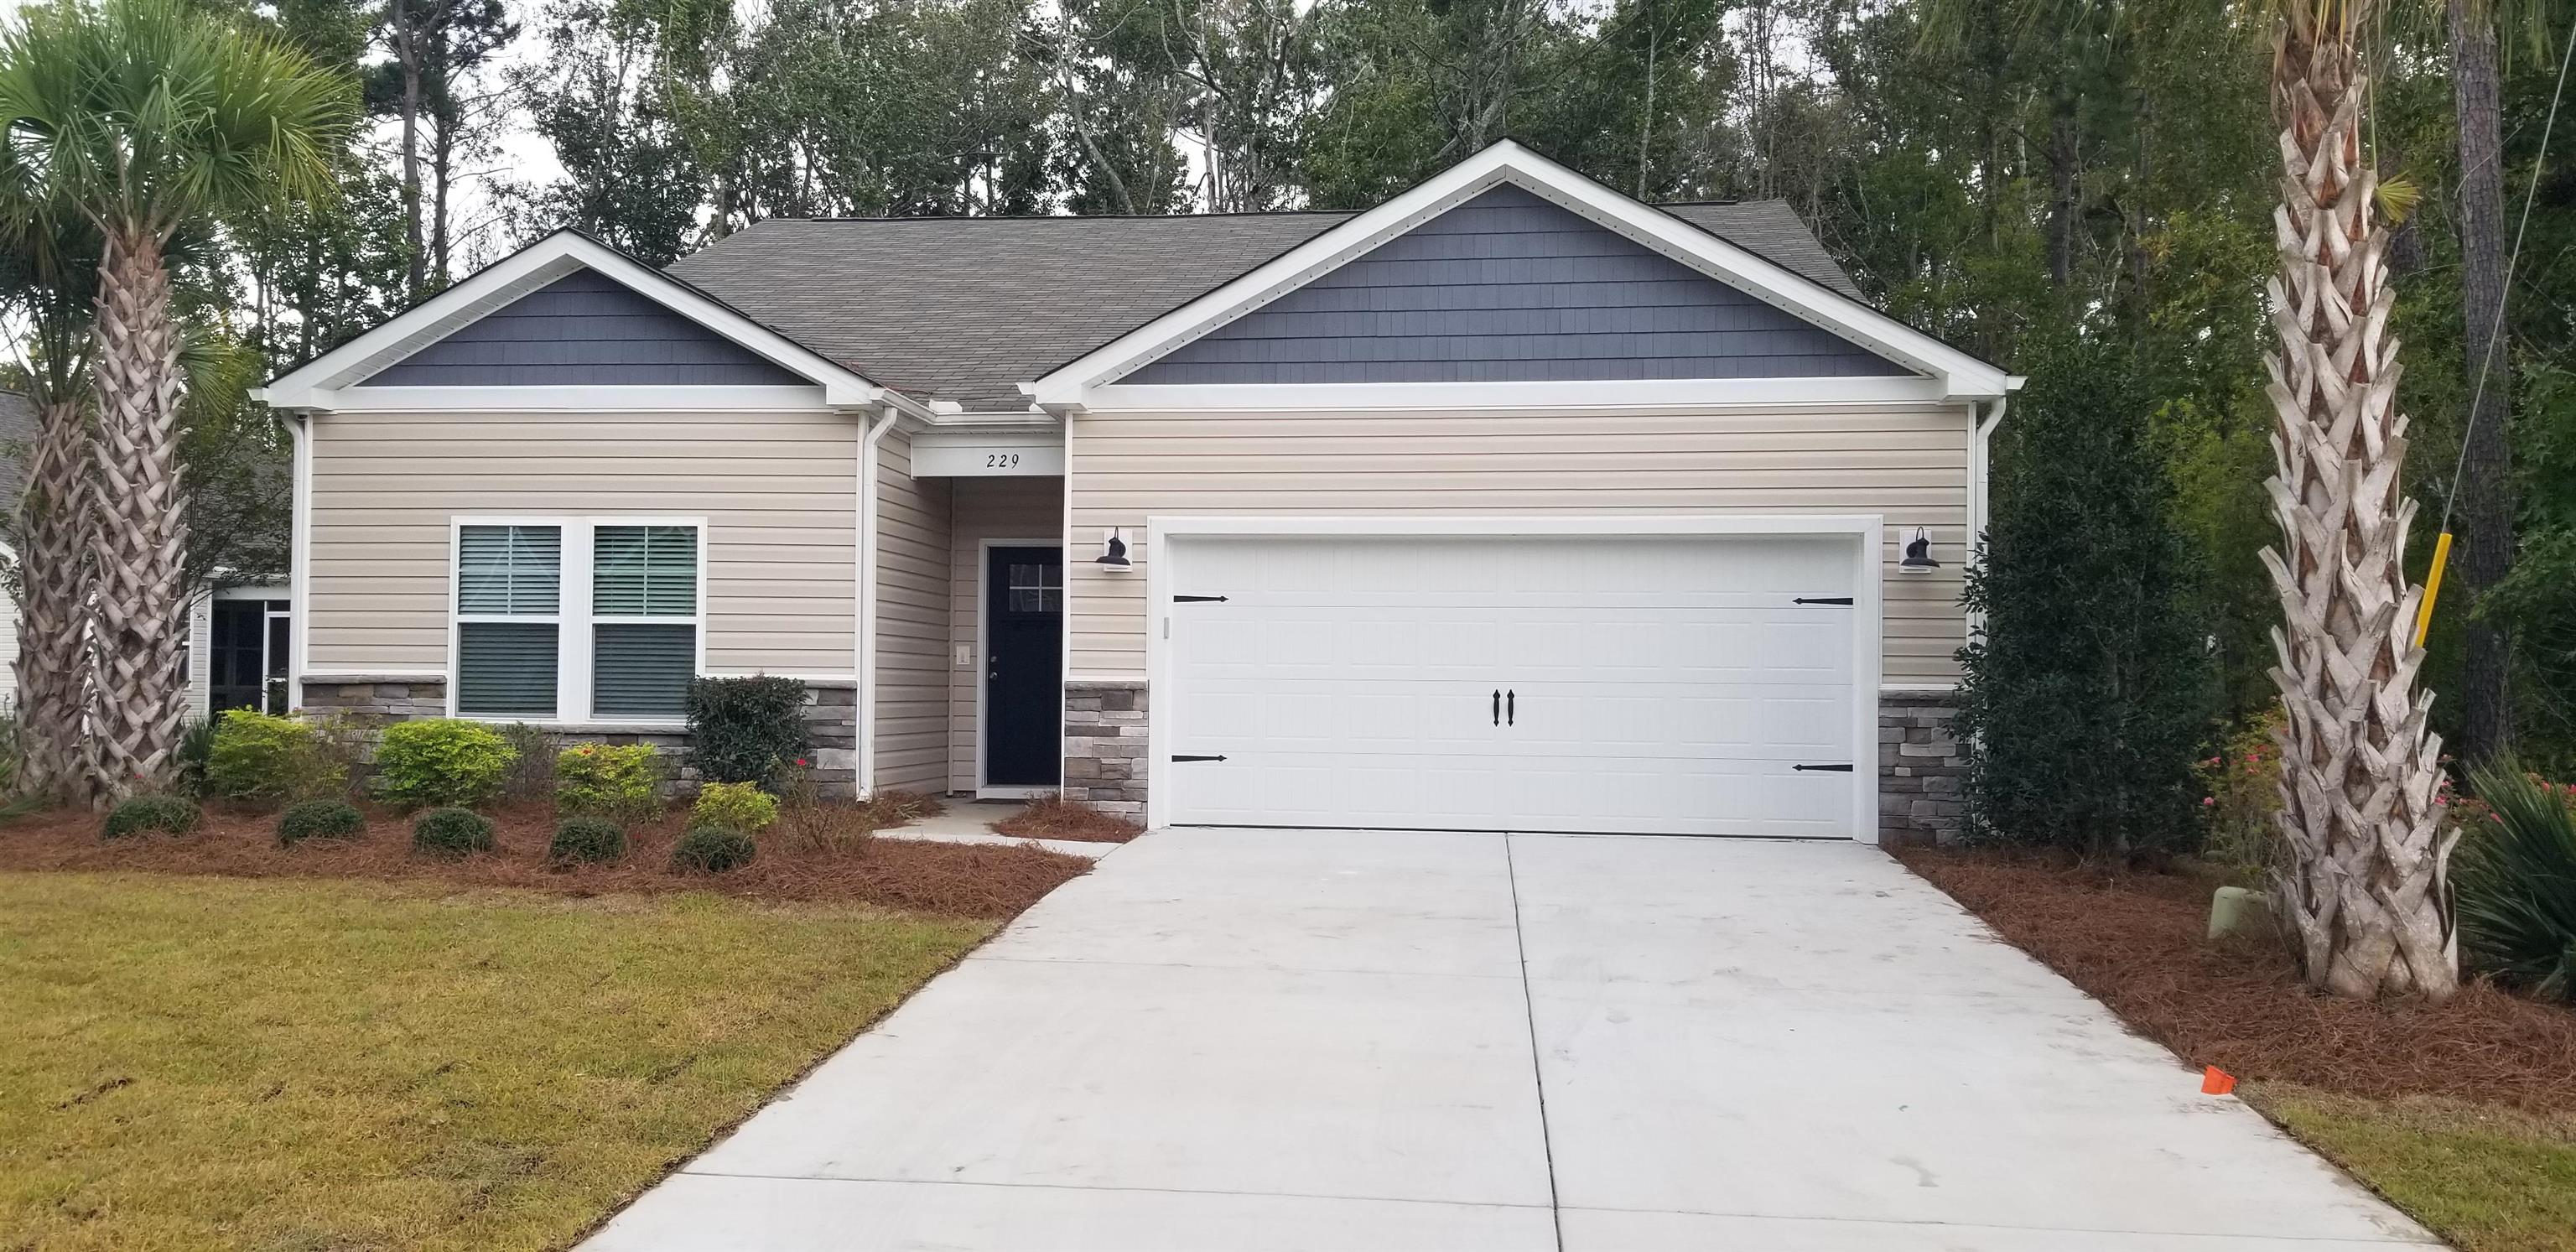 229 Clearwater Dr. Pawleys Island, SC 29585